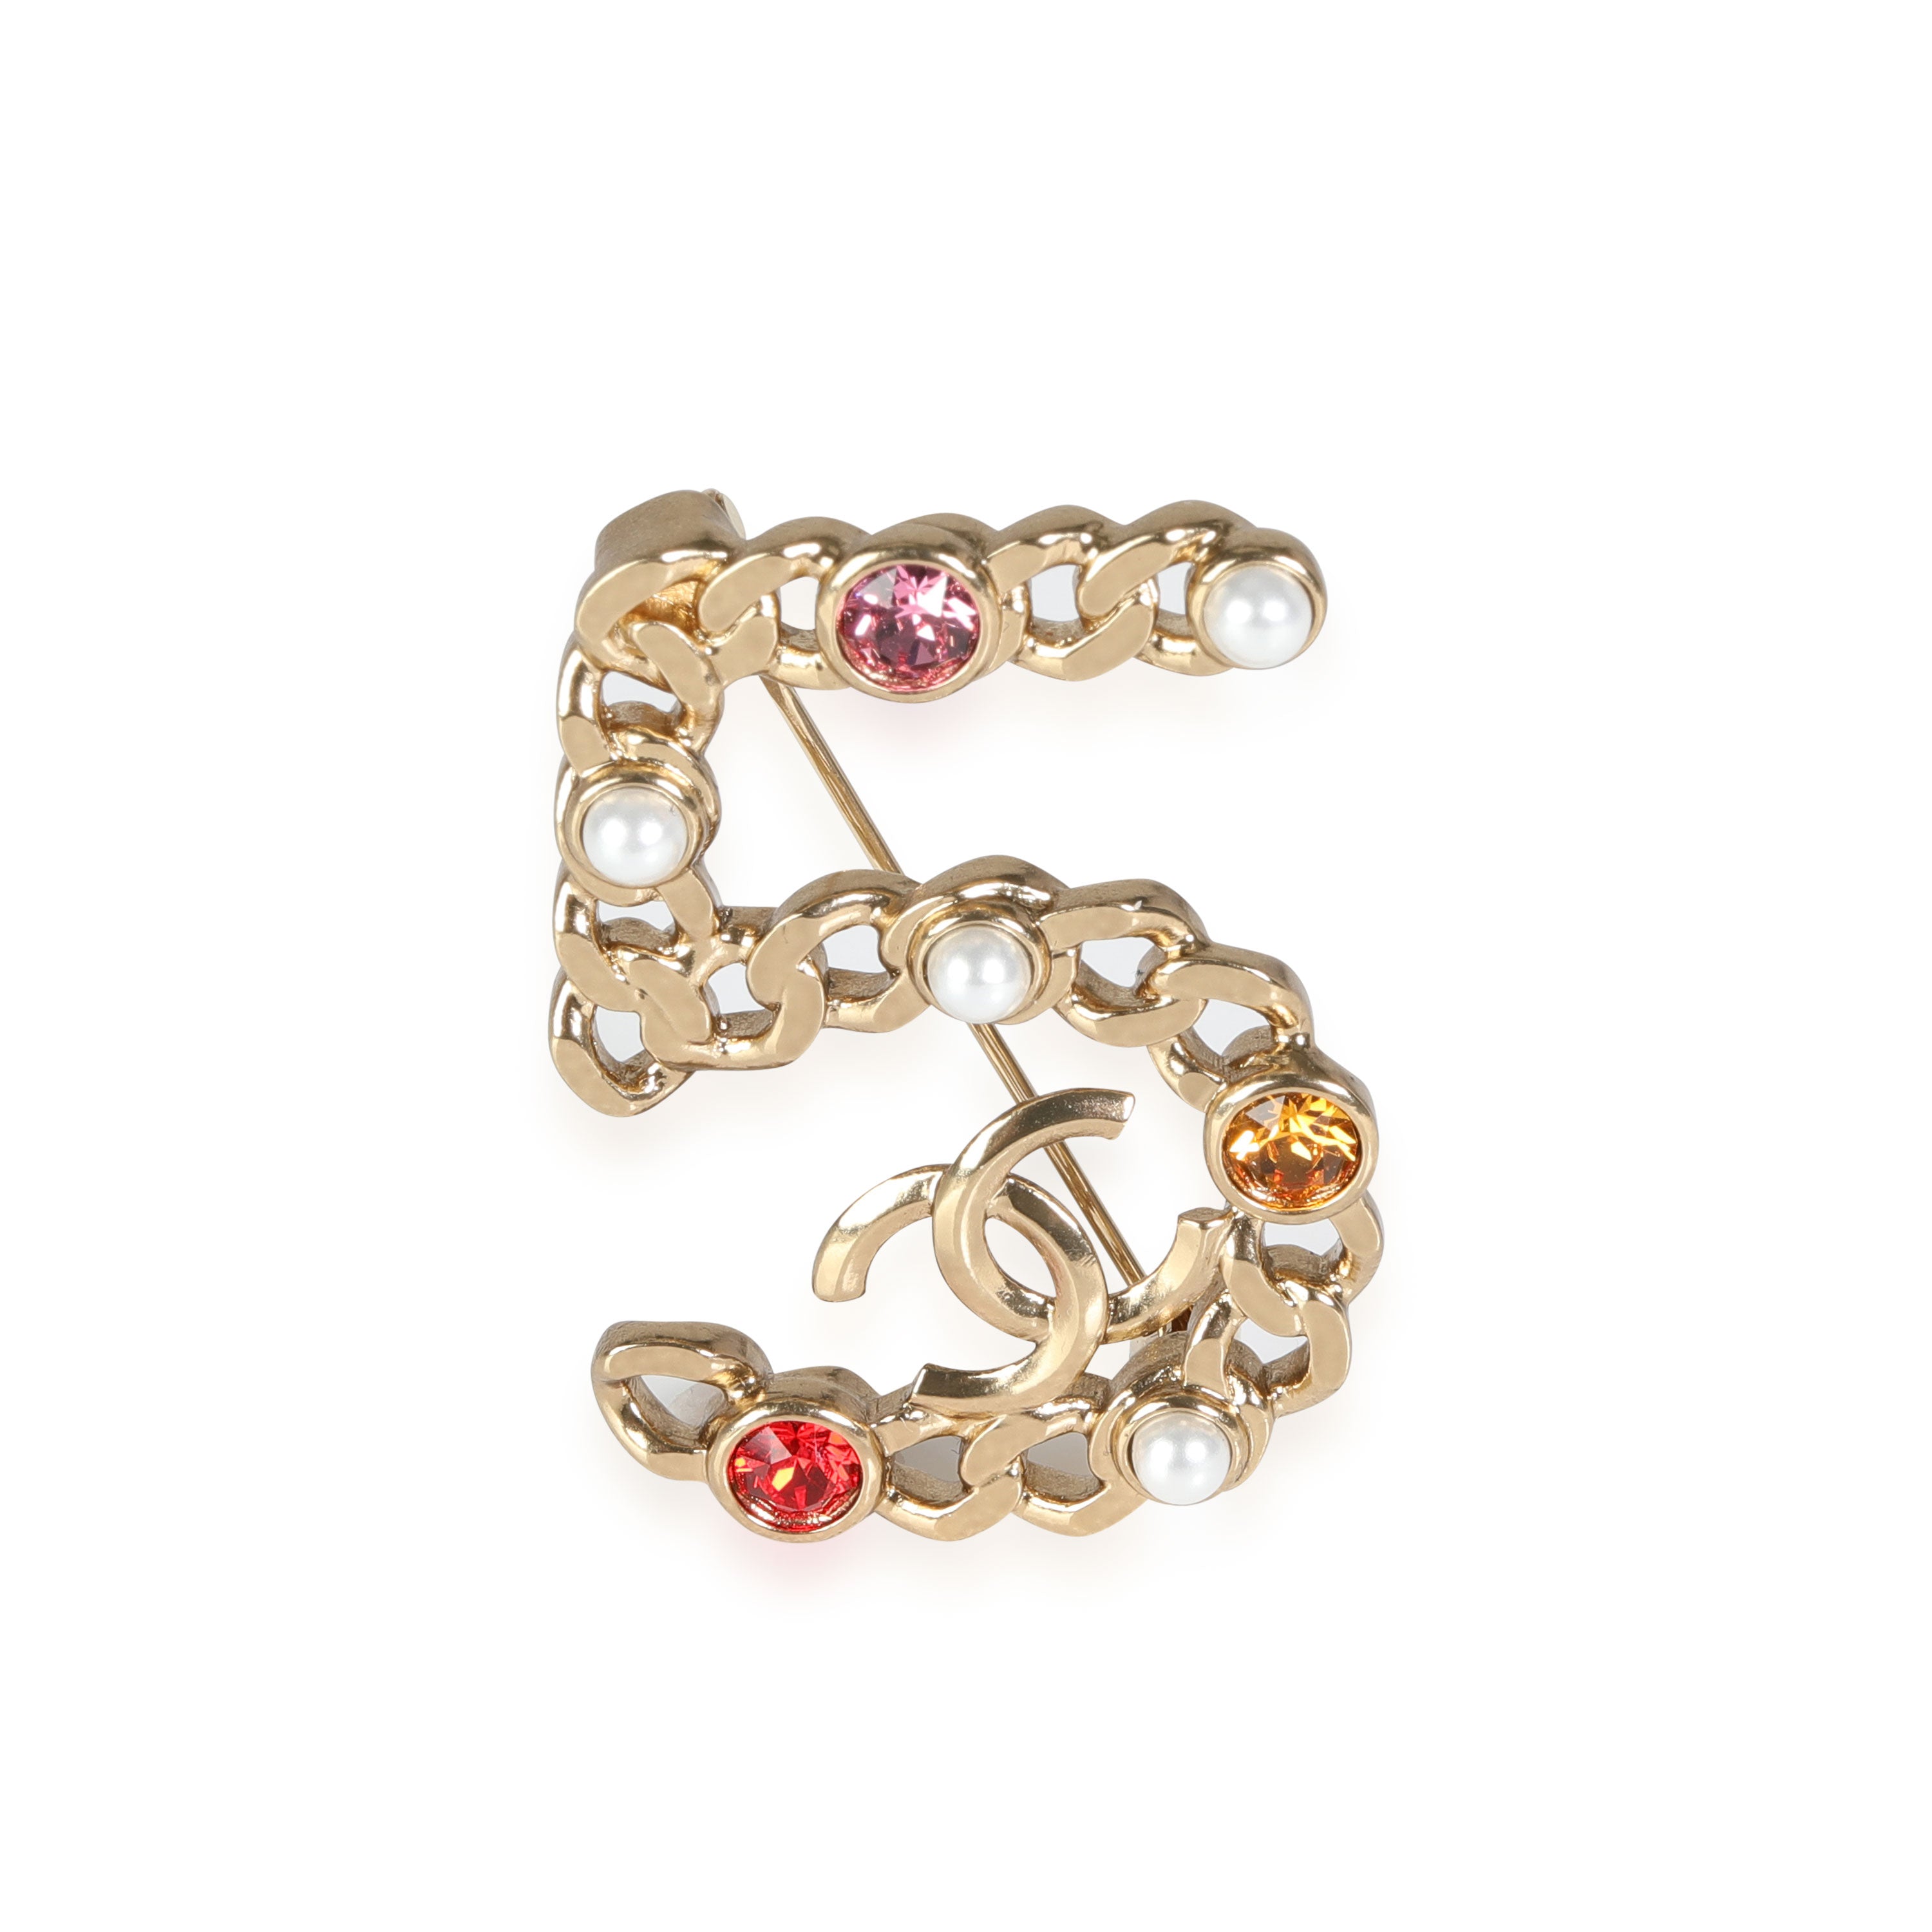 Chanel Autumn 2021 Number 5 Brooch With Faux Pearl and Colored Strass, myGemma, IT